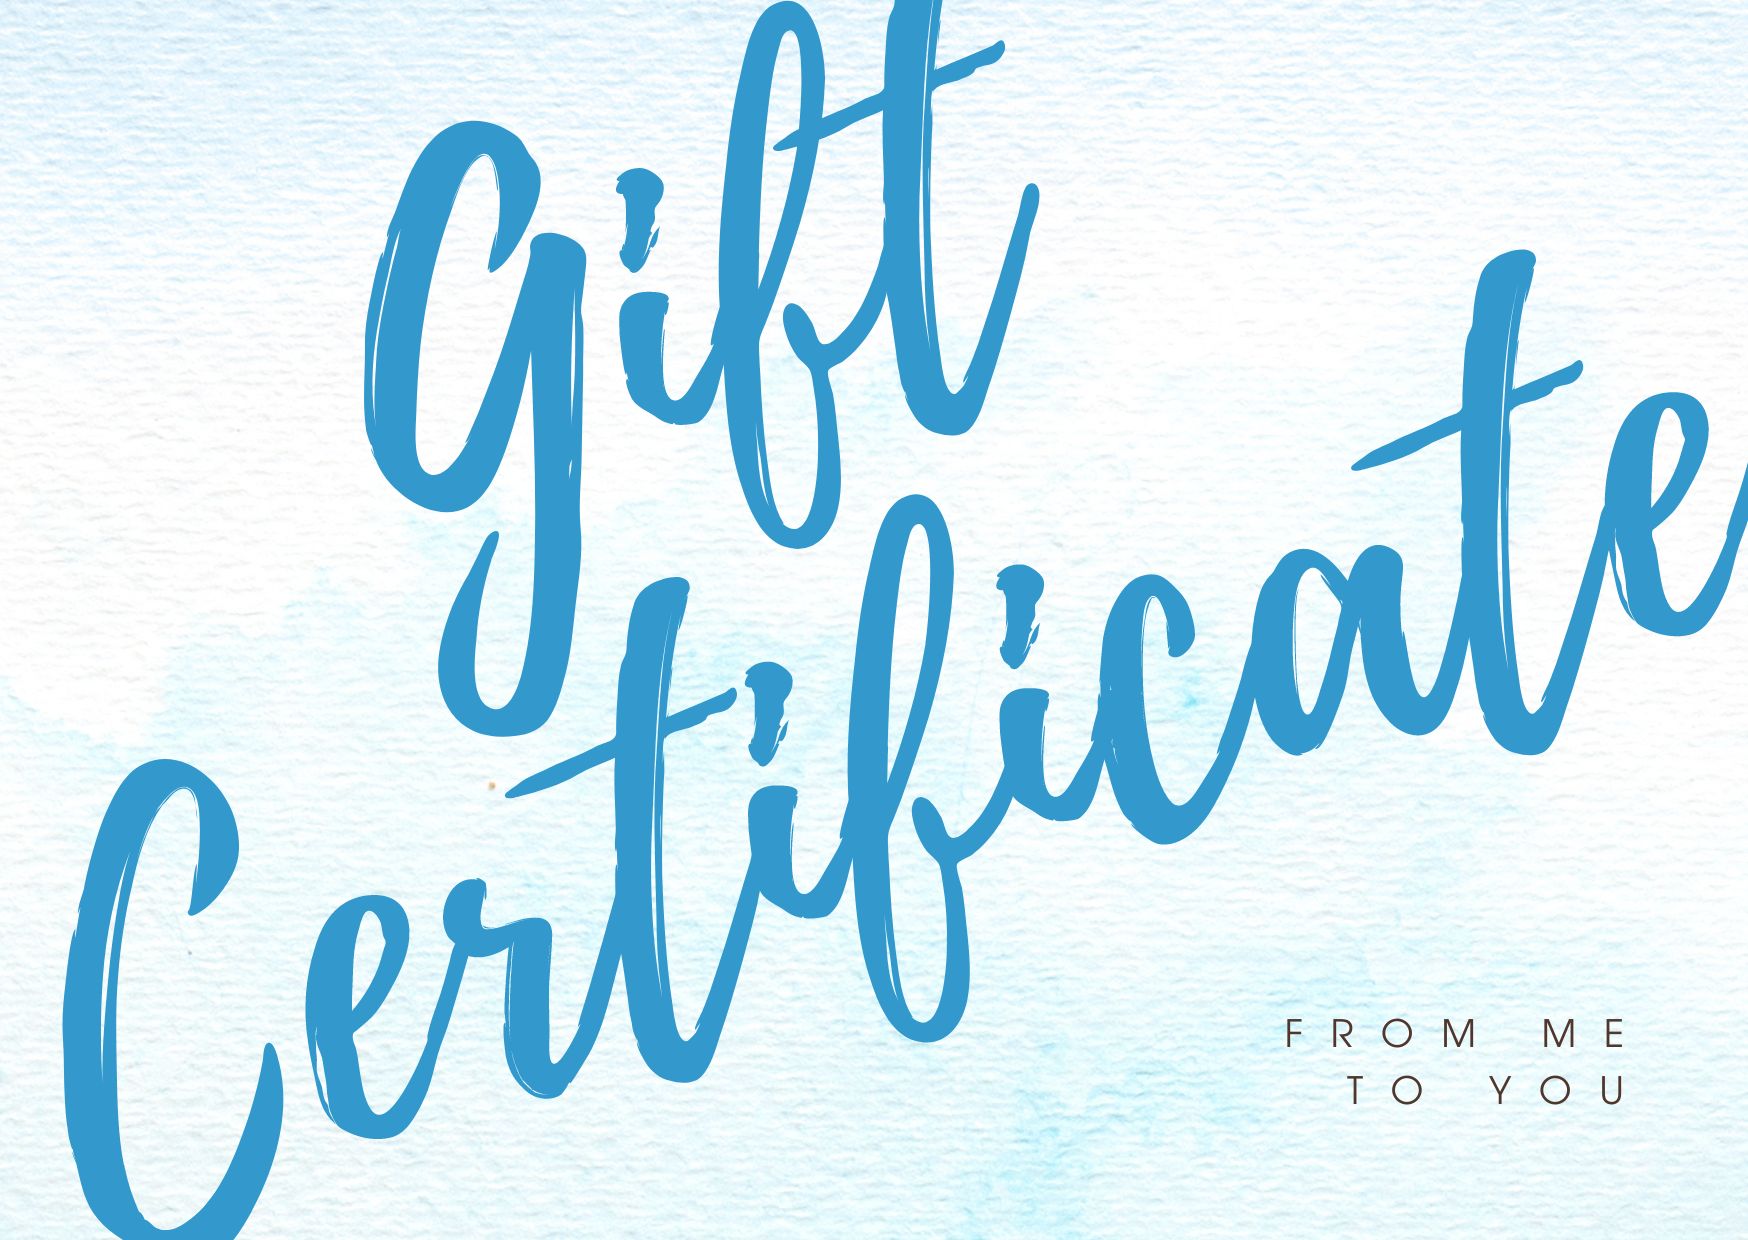 Image of gift certificate with watercolor background